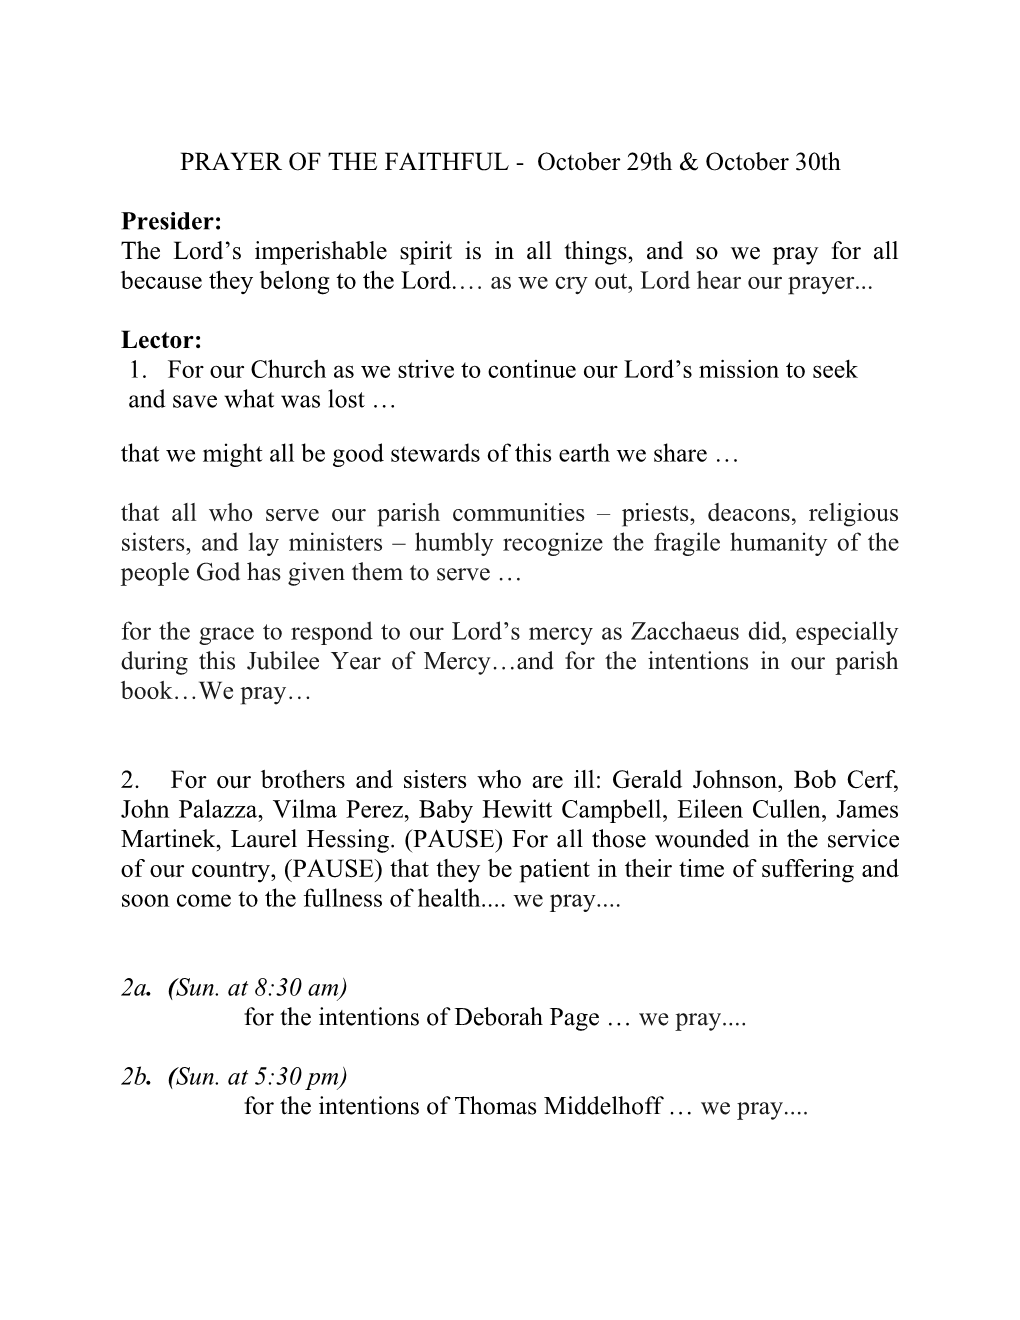 PRAYER of the FAITHFUL - October 29Th & October 30Th